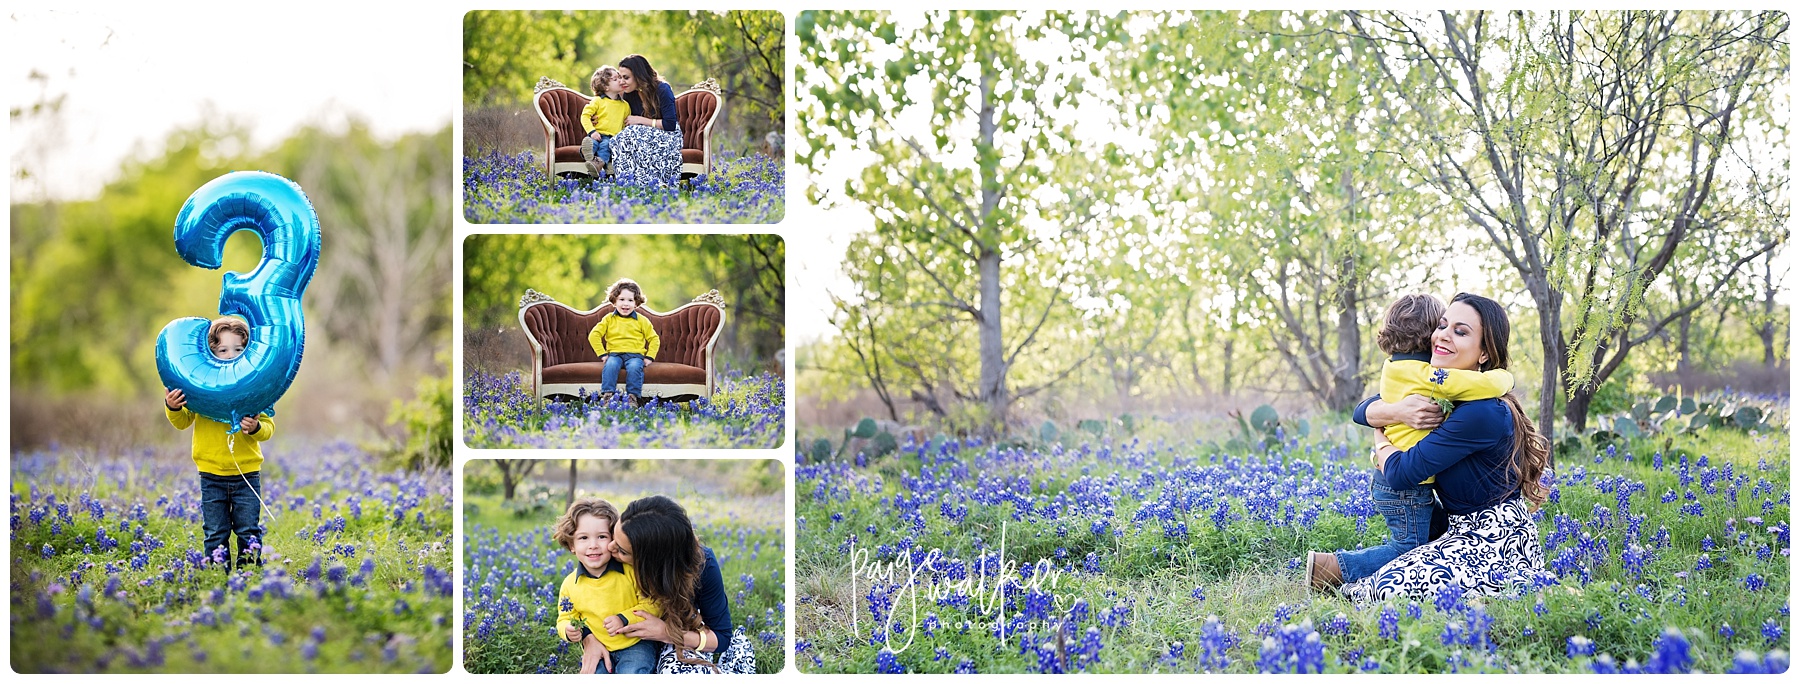 son and mom sitting in the bluebonnets